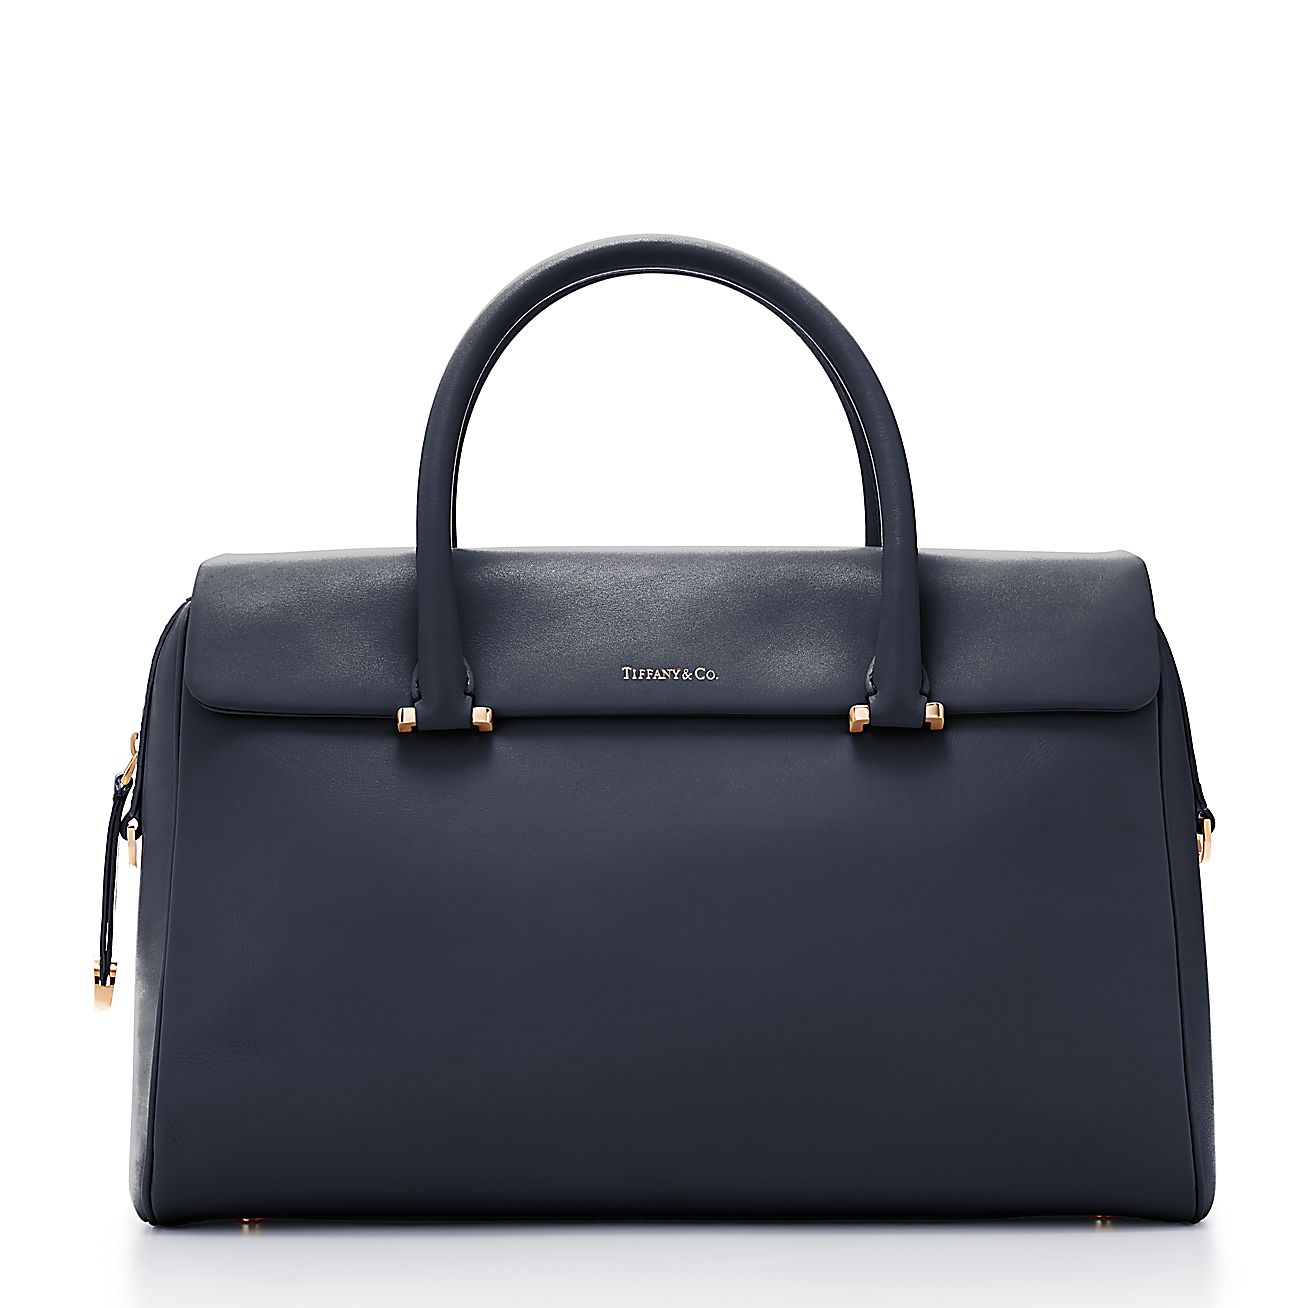 Peyton satchel in midnight smooth leather, small. More colors available ...